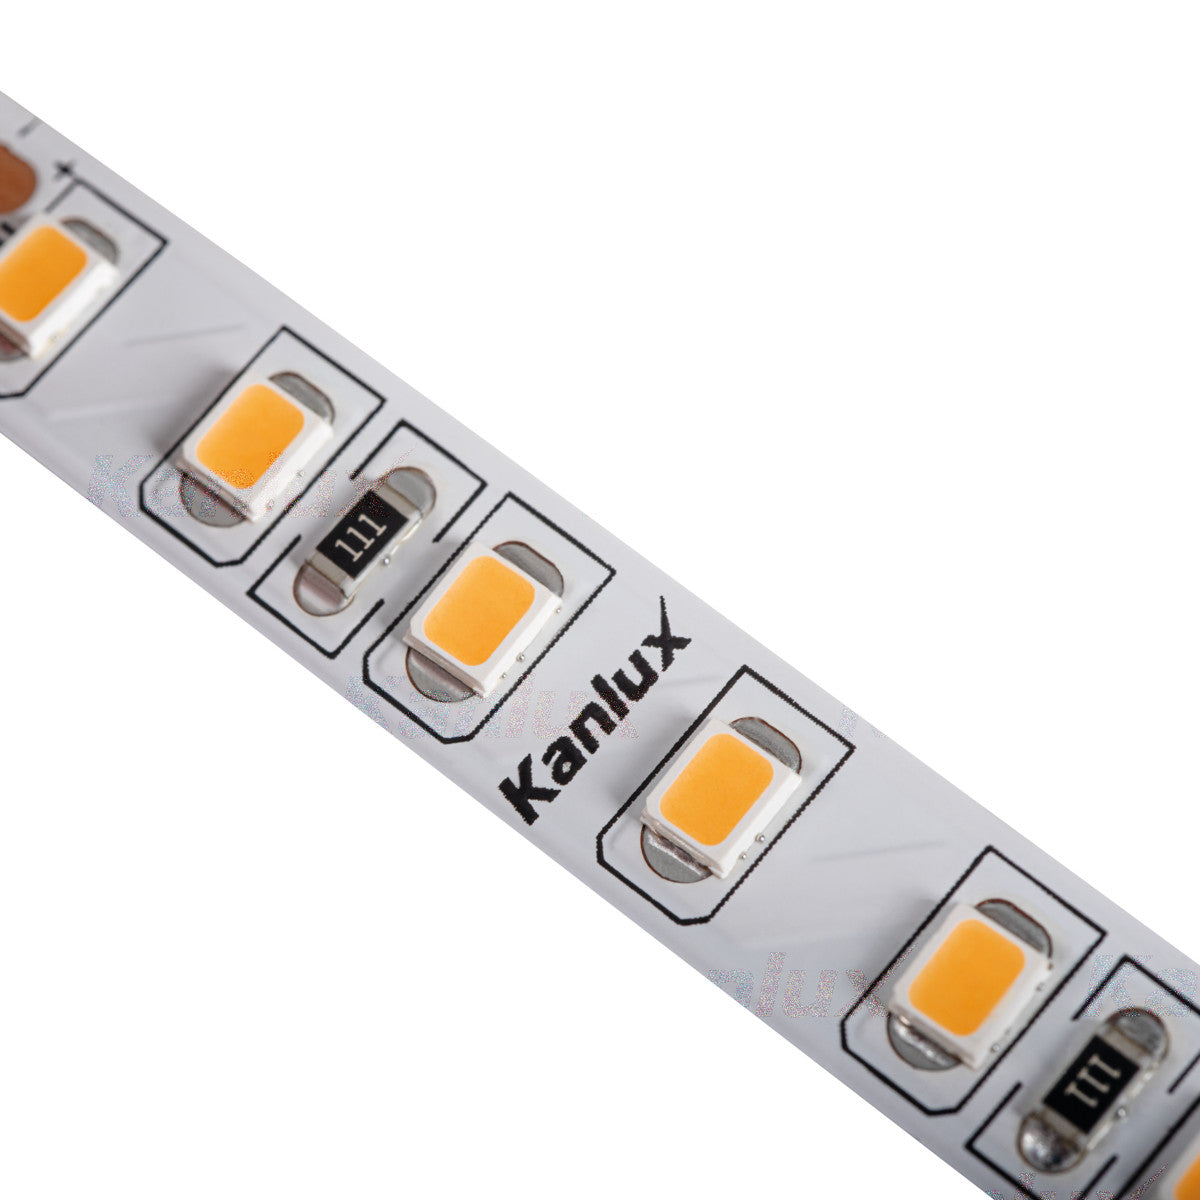 Kanlux Professional 30 Meter L120B 16W/M 24V 8mm LED Strip Tape Roll - Choice of Warm, Neutral and Cool White